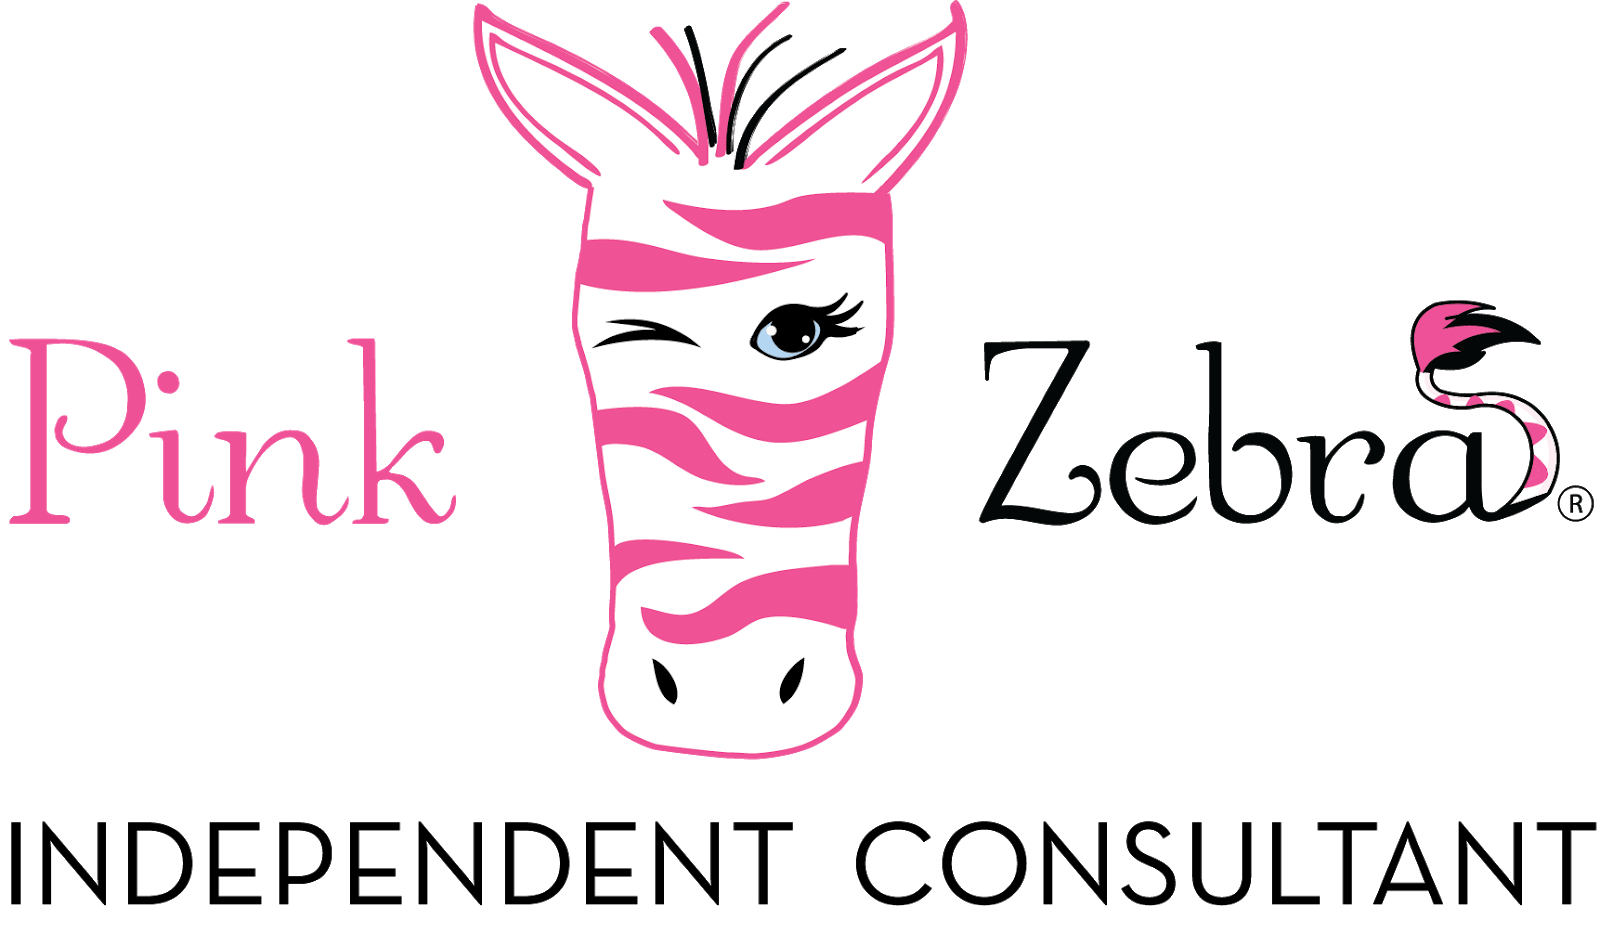 Pink Zebra Home Logo - Pink Zebra Home Consultant: Earn a FREE Trip to